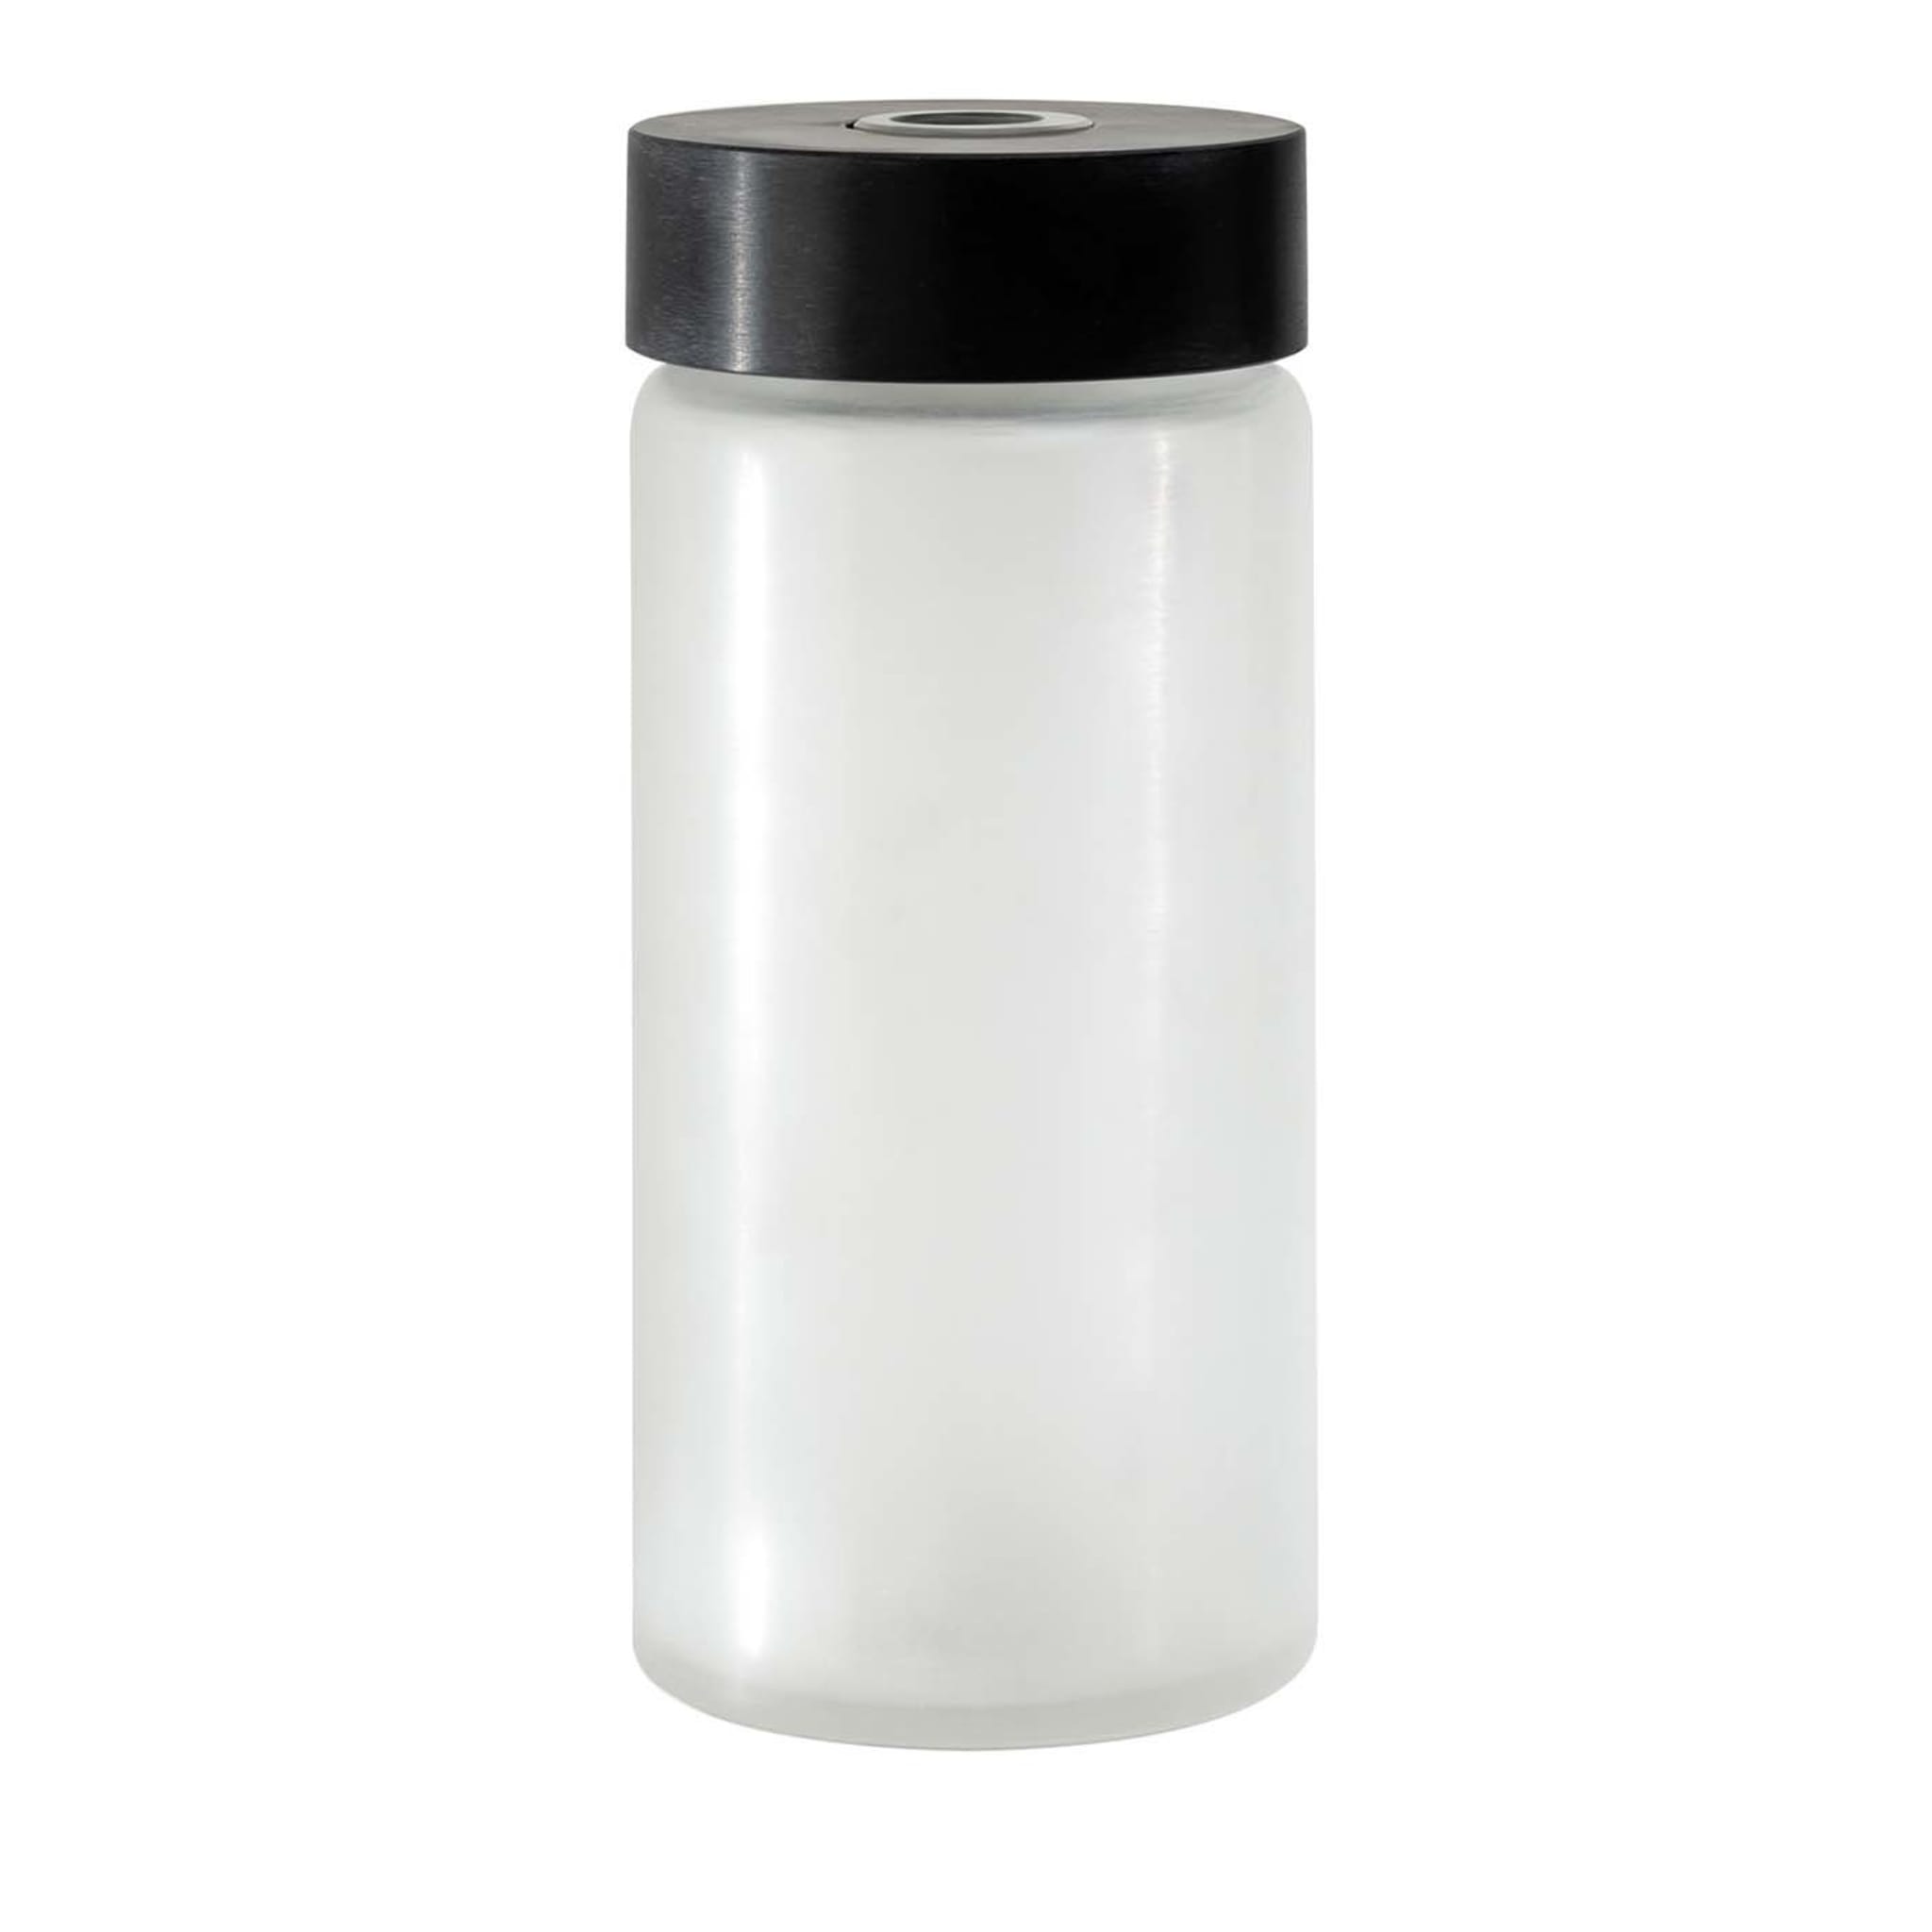 The Tall Cylinder Glass Vase in White and Black - Main view